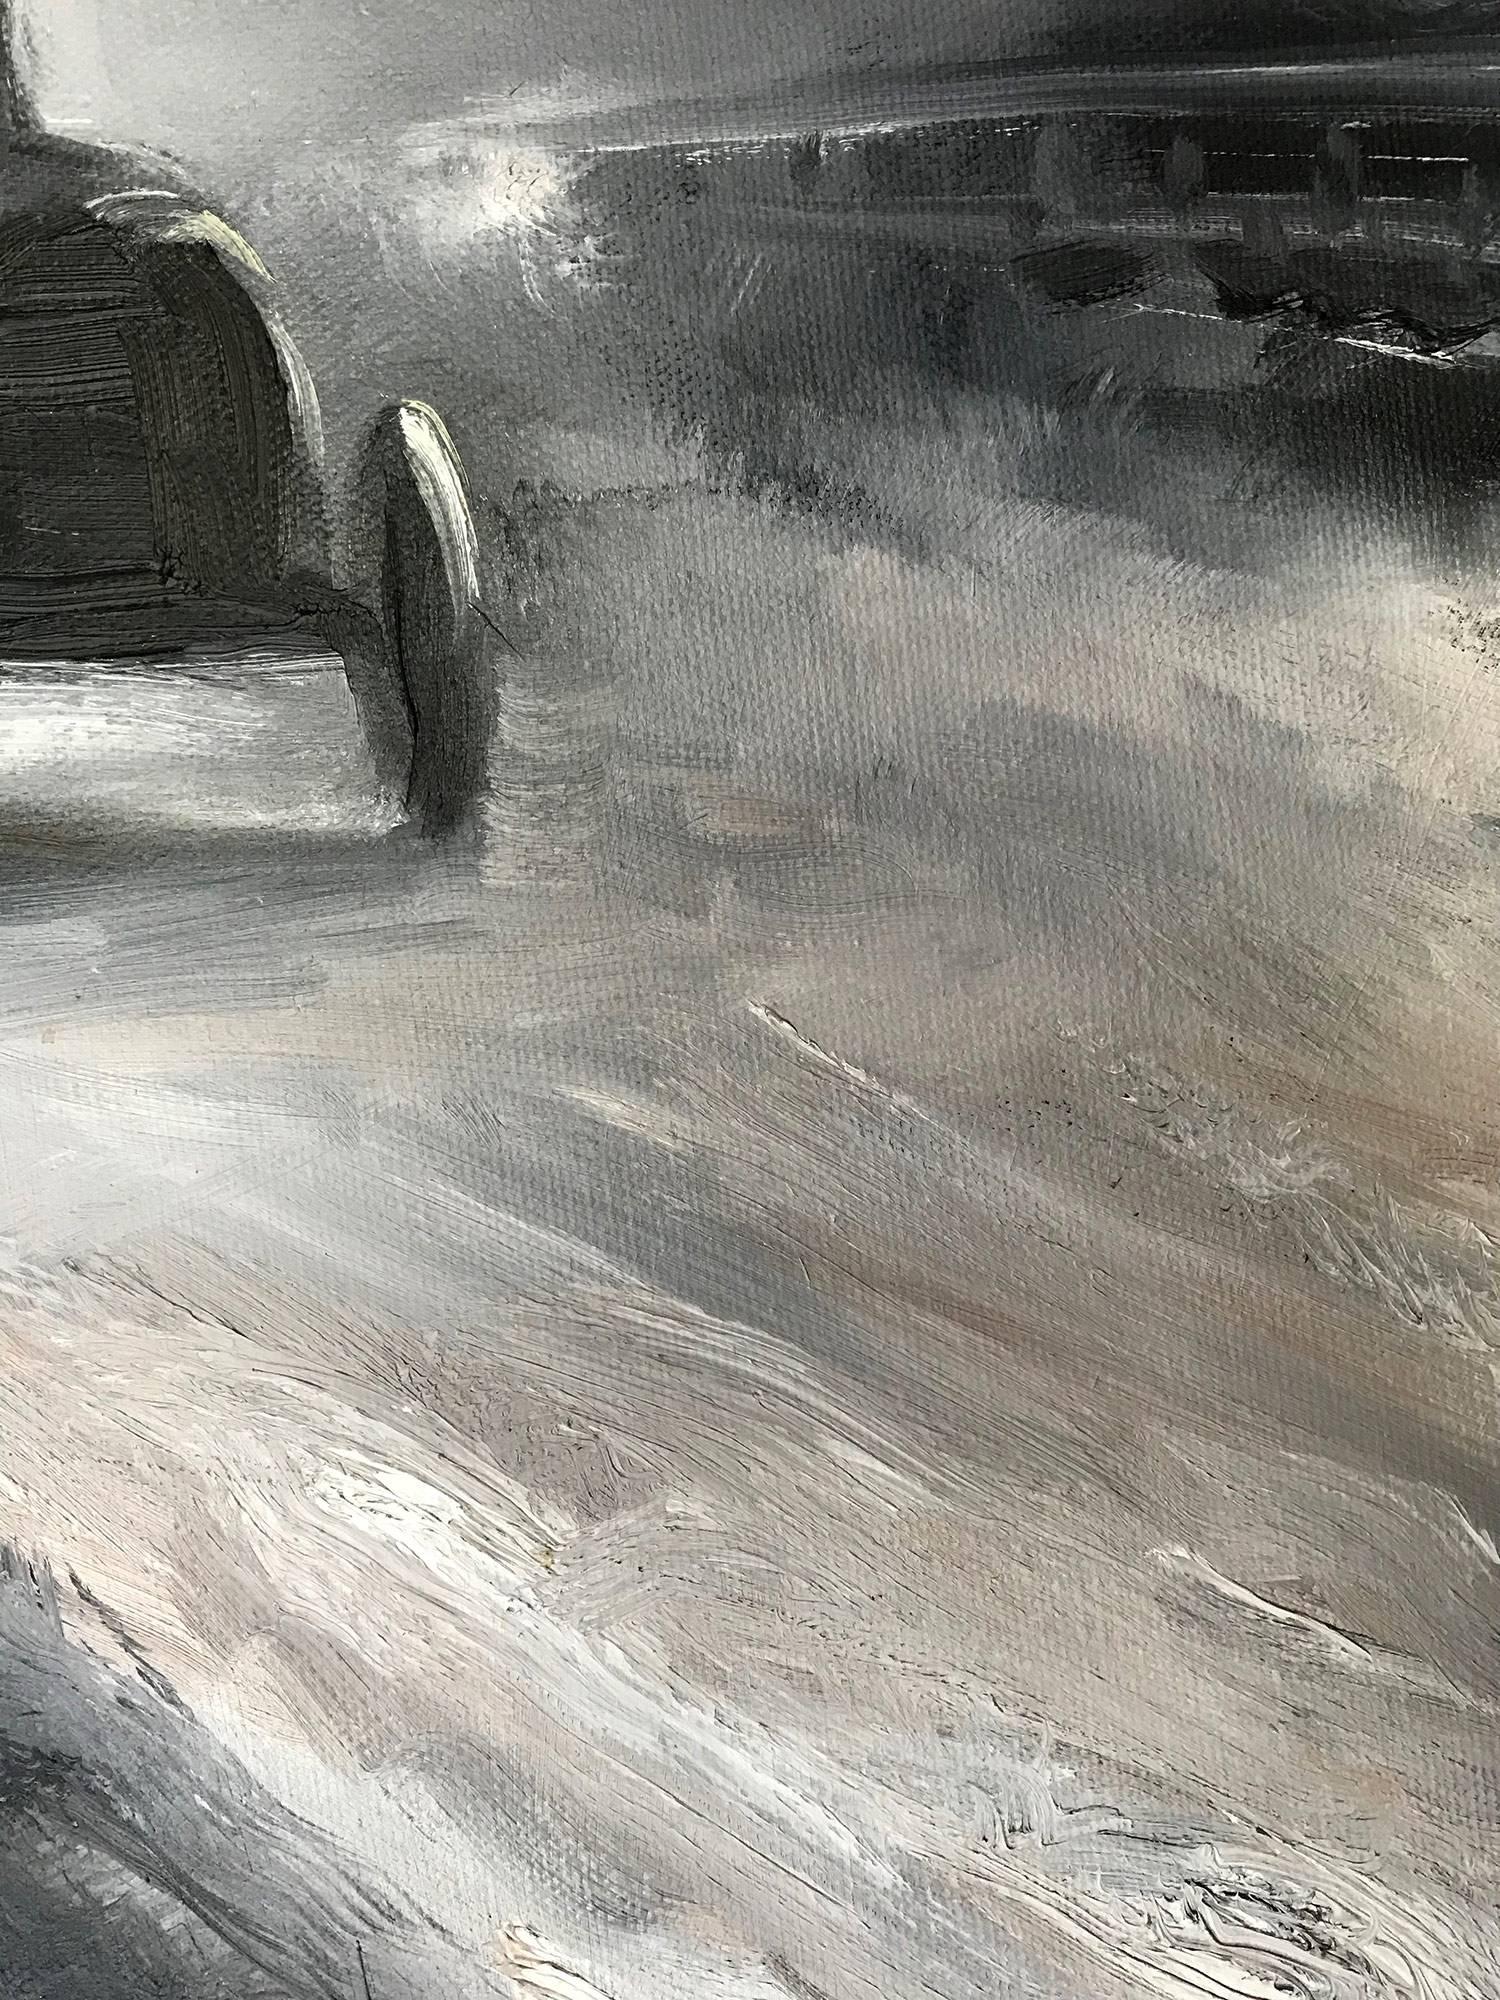 An impressionistic depiction of two figures seated in an old Ford riding down a dusty pathway near the farm.  This painting goes back in time as the artist captures the style and trend of the early 20th Century with old cars and the moodiness of